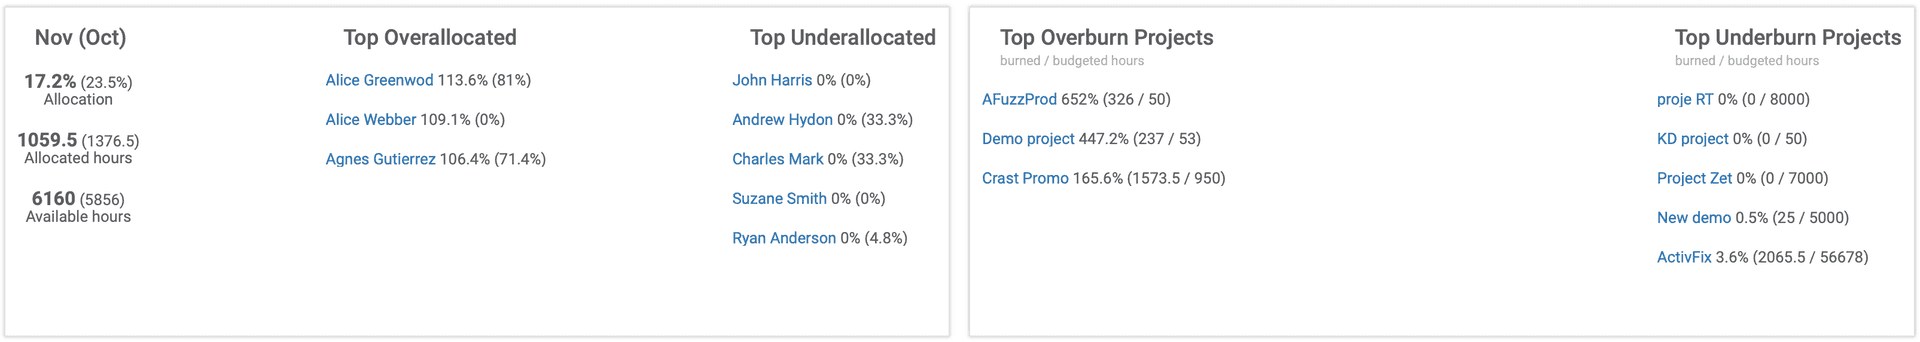 Dashboard view with top over/underallocated people and top over/under burn projects.